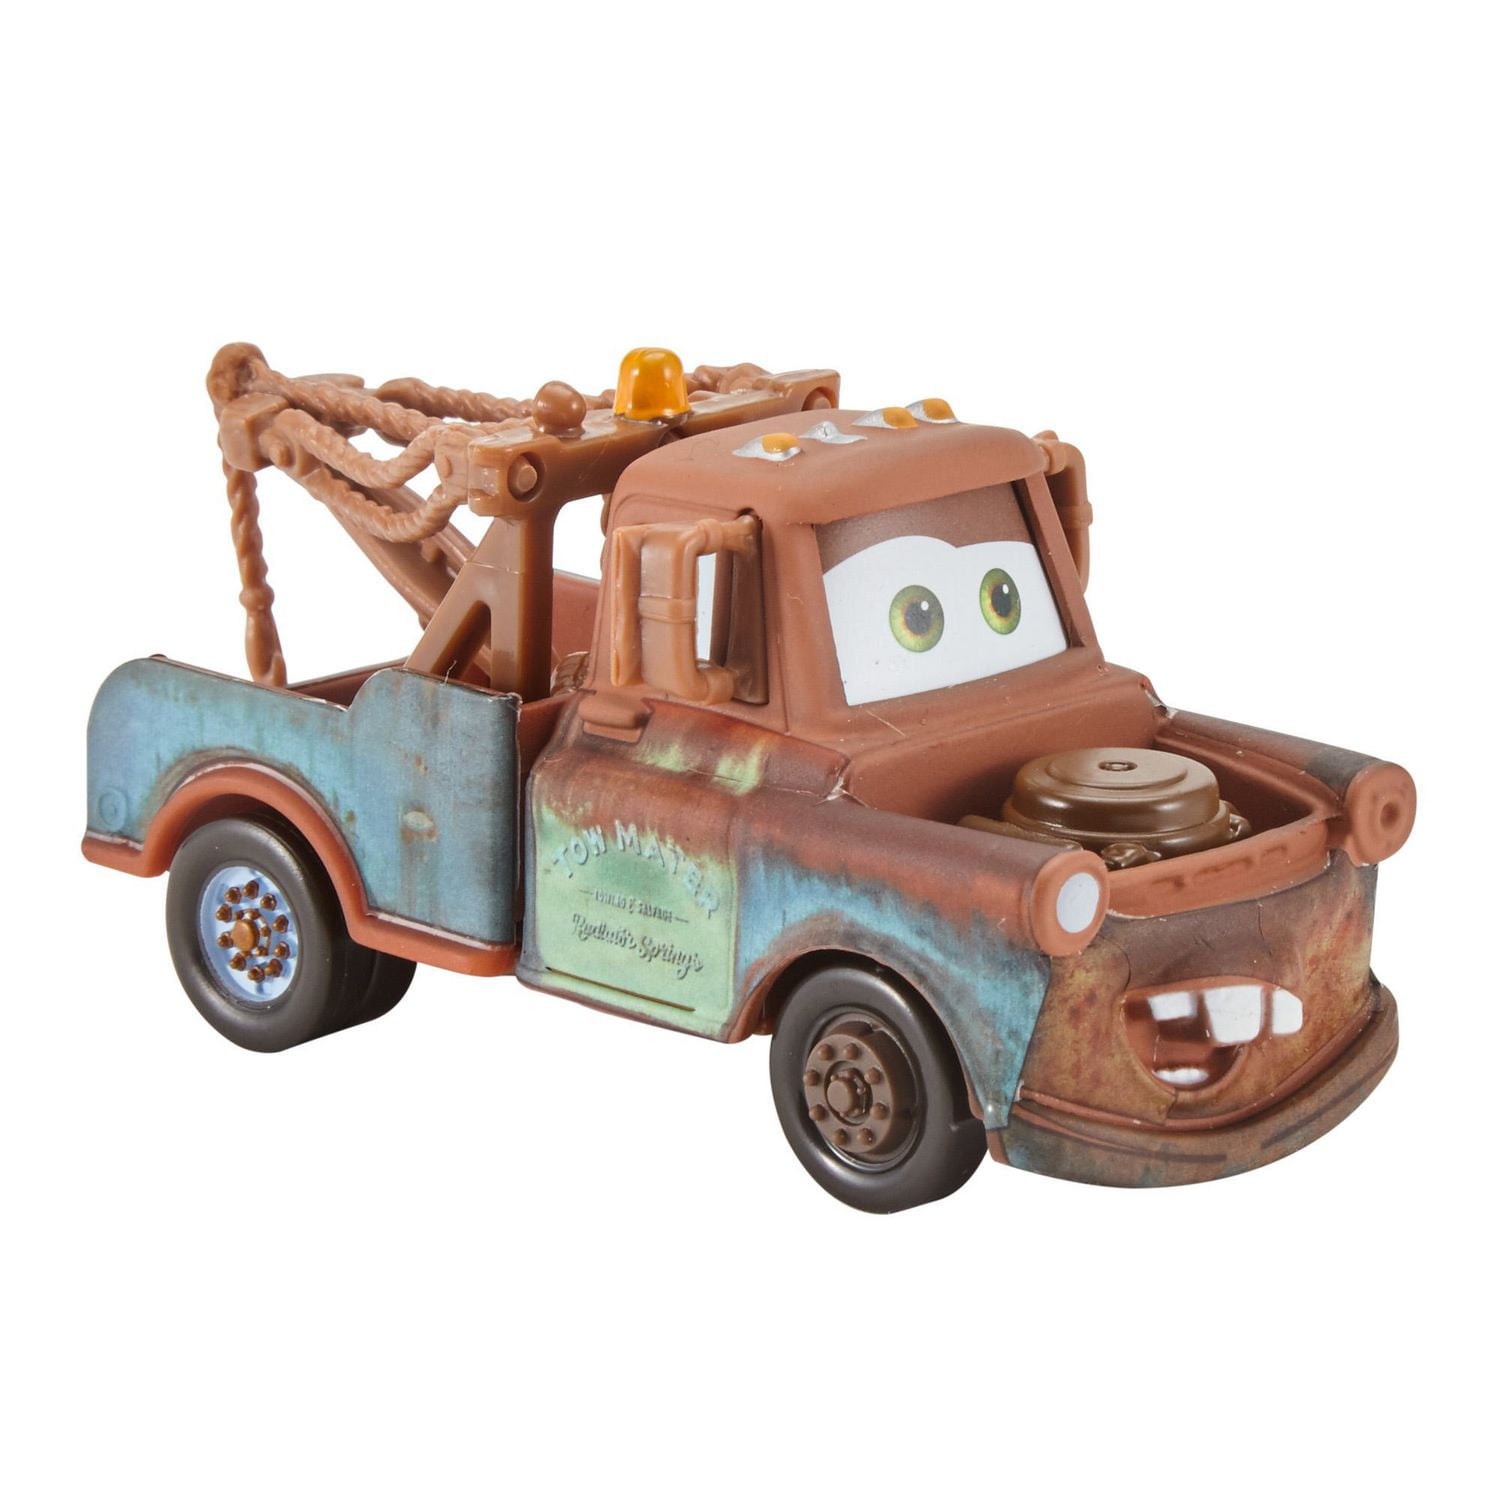 What Truck Is Mater Based on From the 'Cars' Movies?